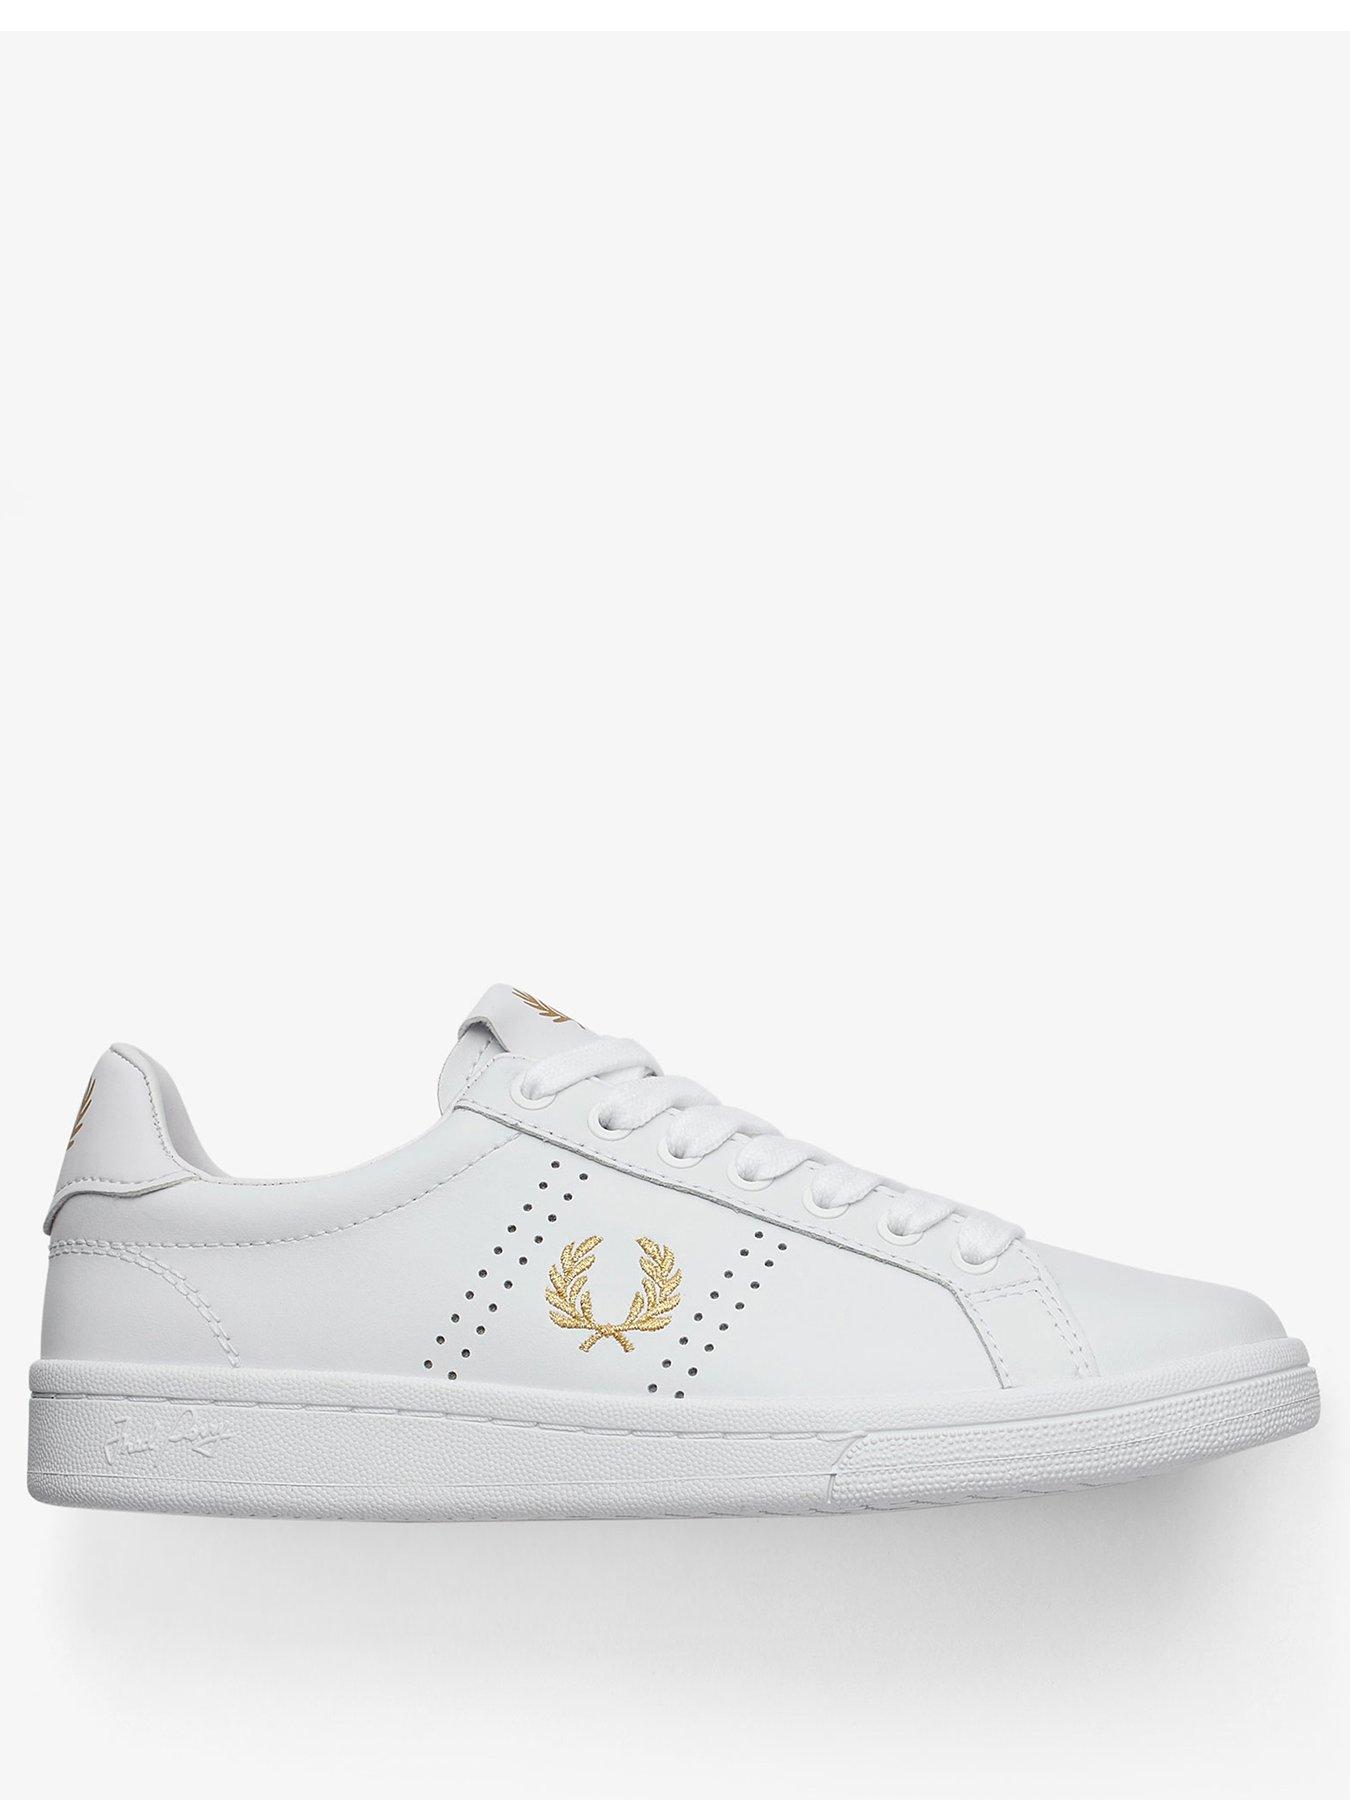 fred perry shoes women